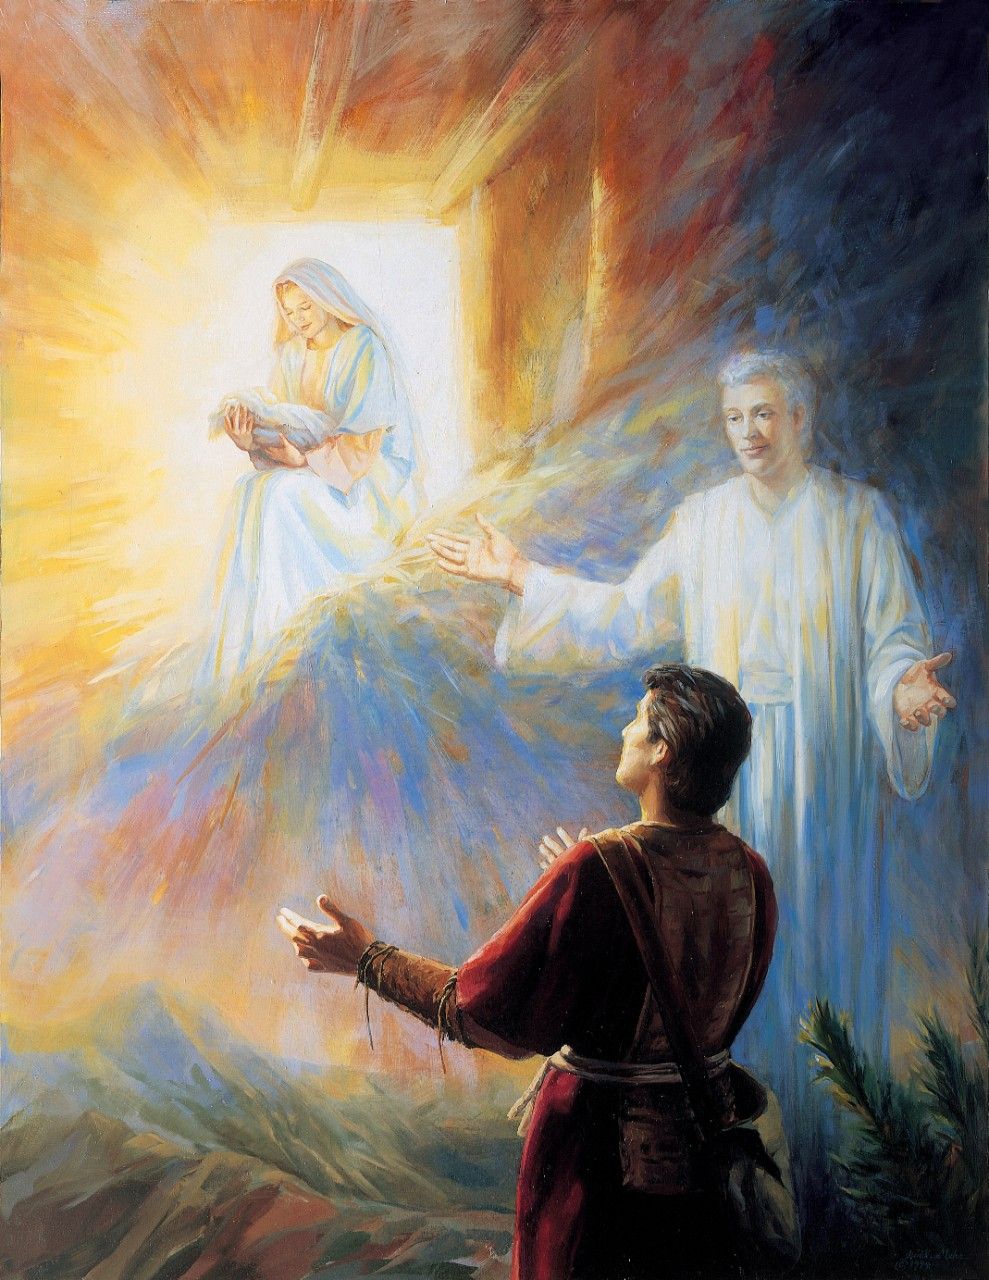 Nephi's Vision of the Virgin Mary, by Judith A. Mehr